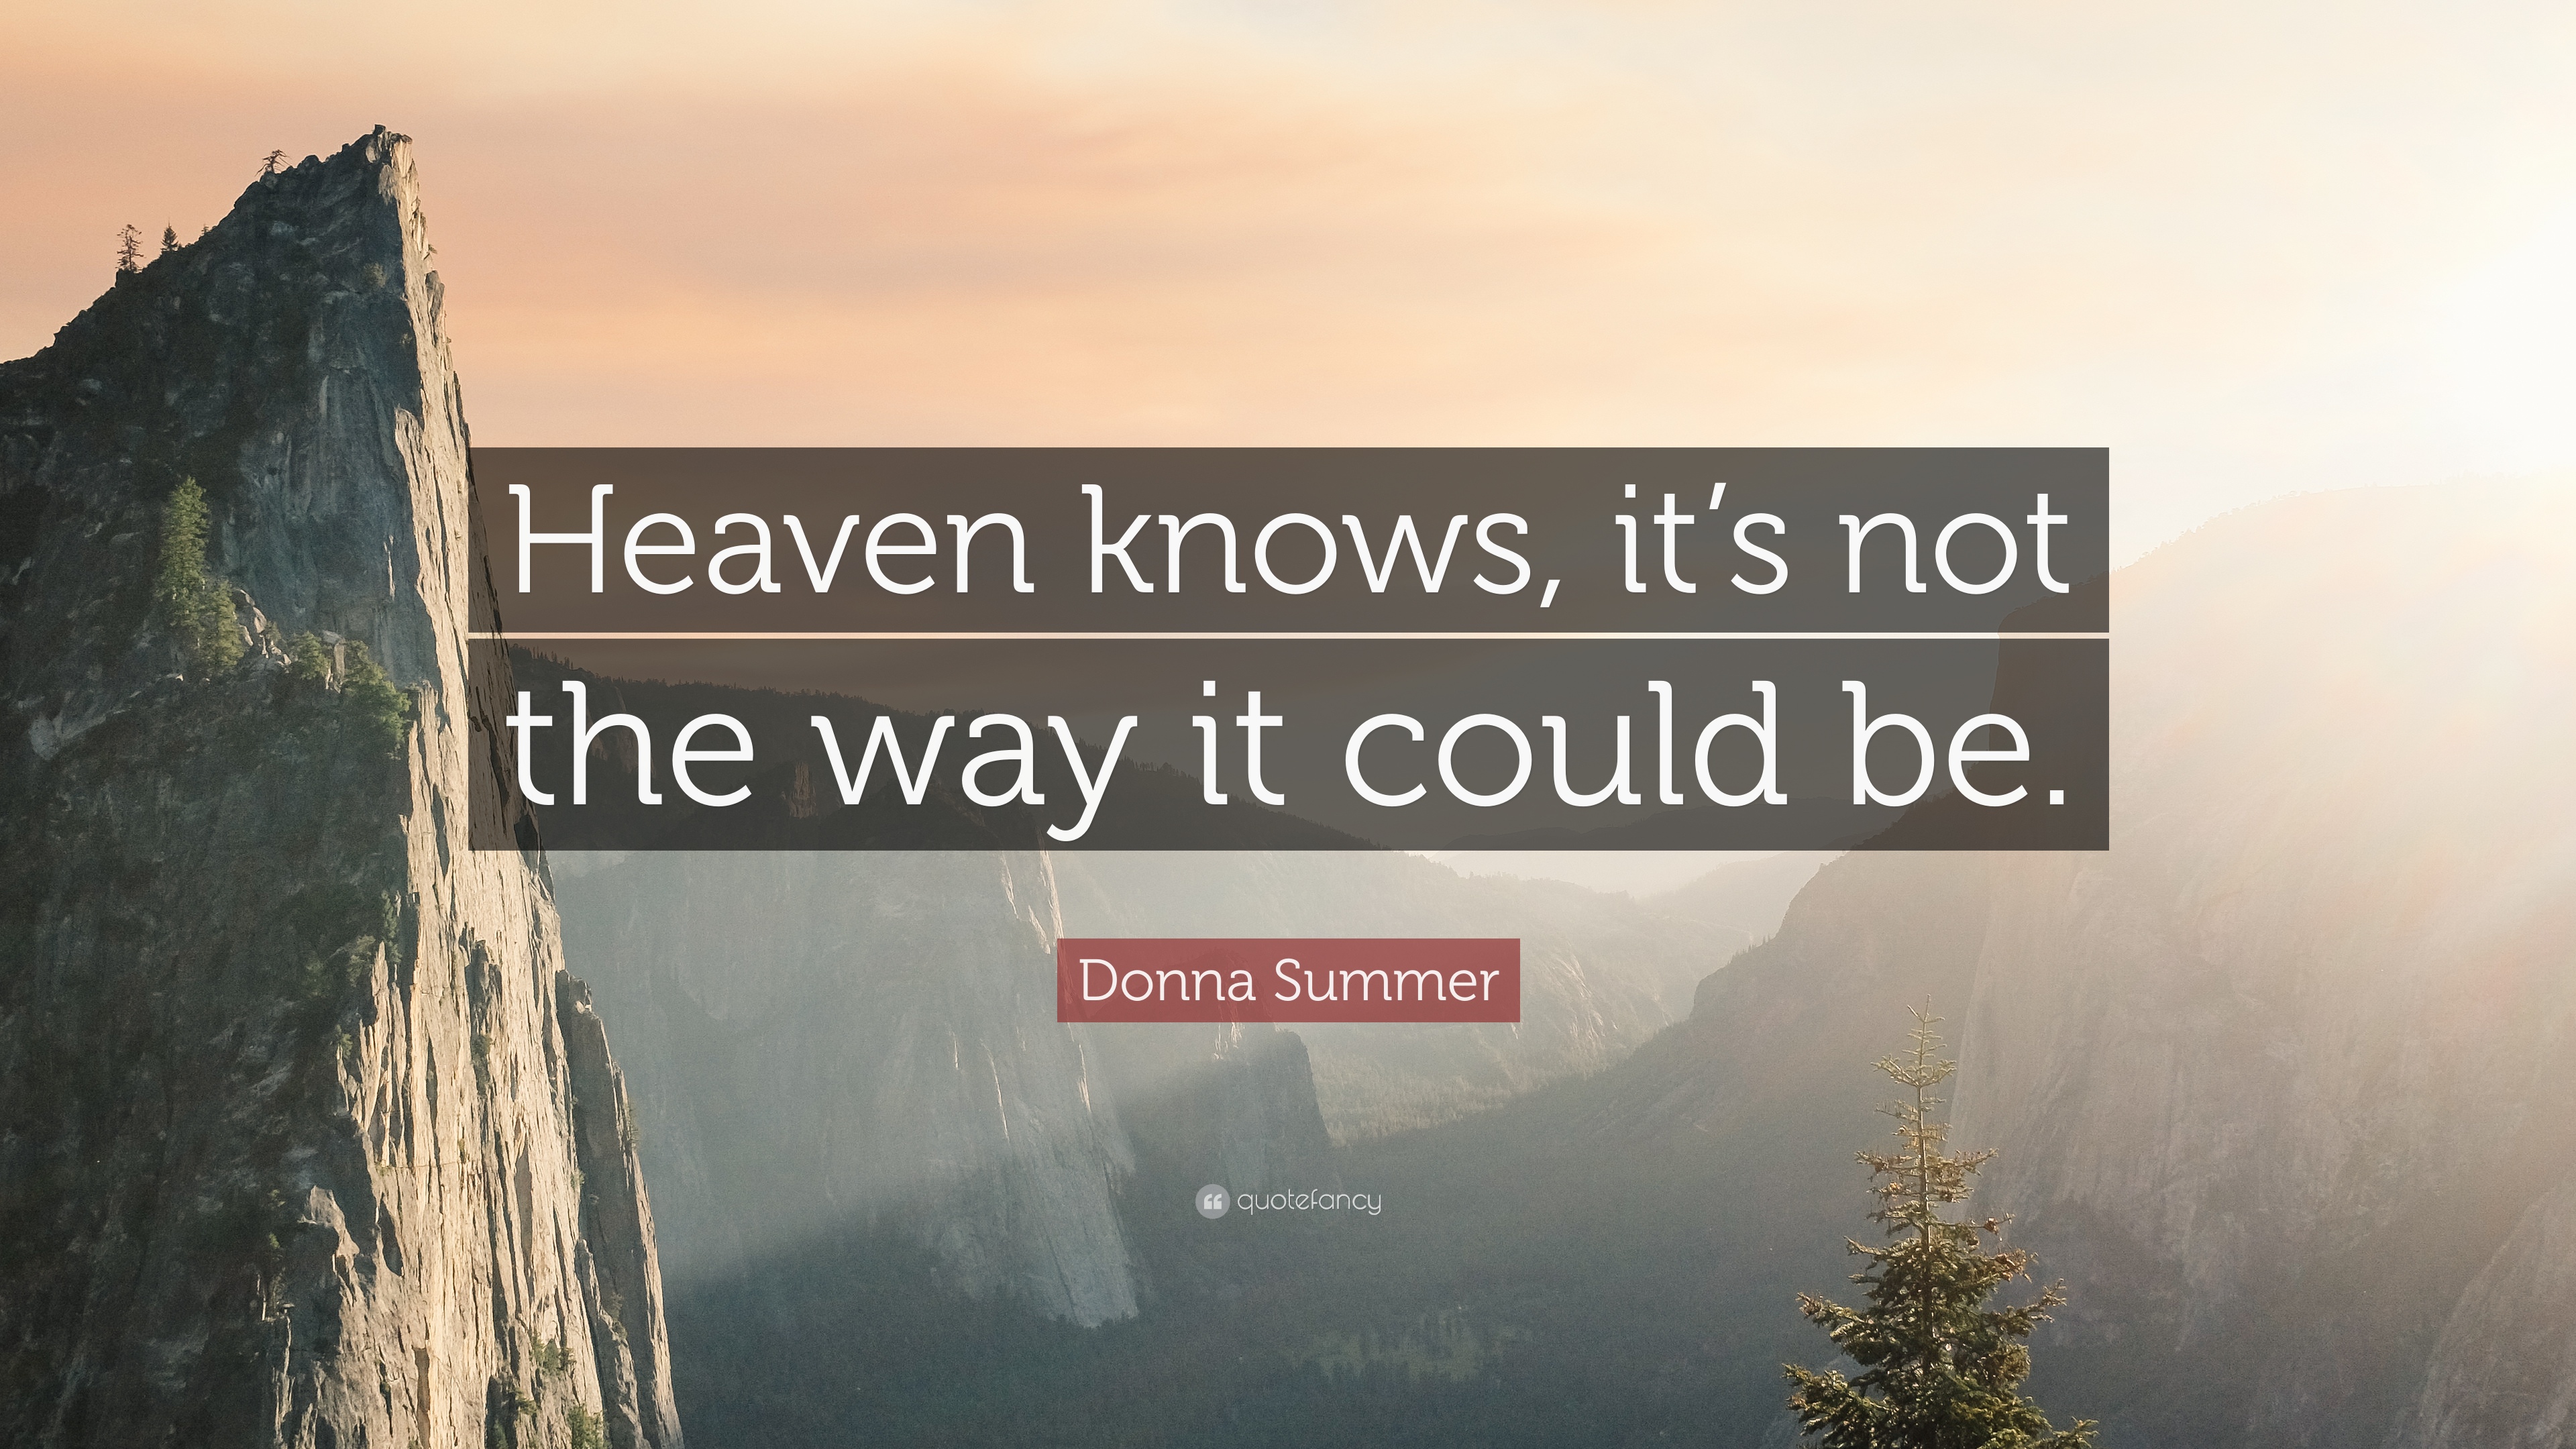 Donna Summer Quote: “Heaven knows, it's not the way it could be.” 7